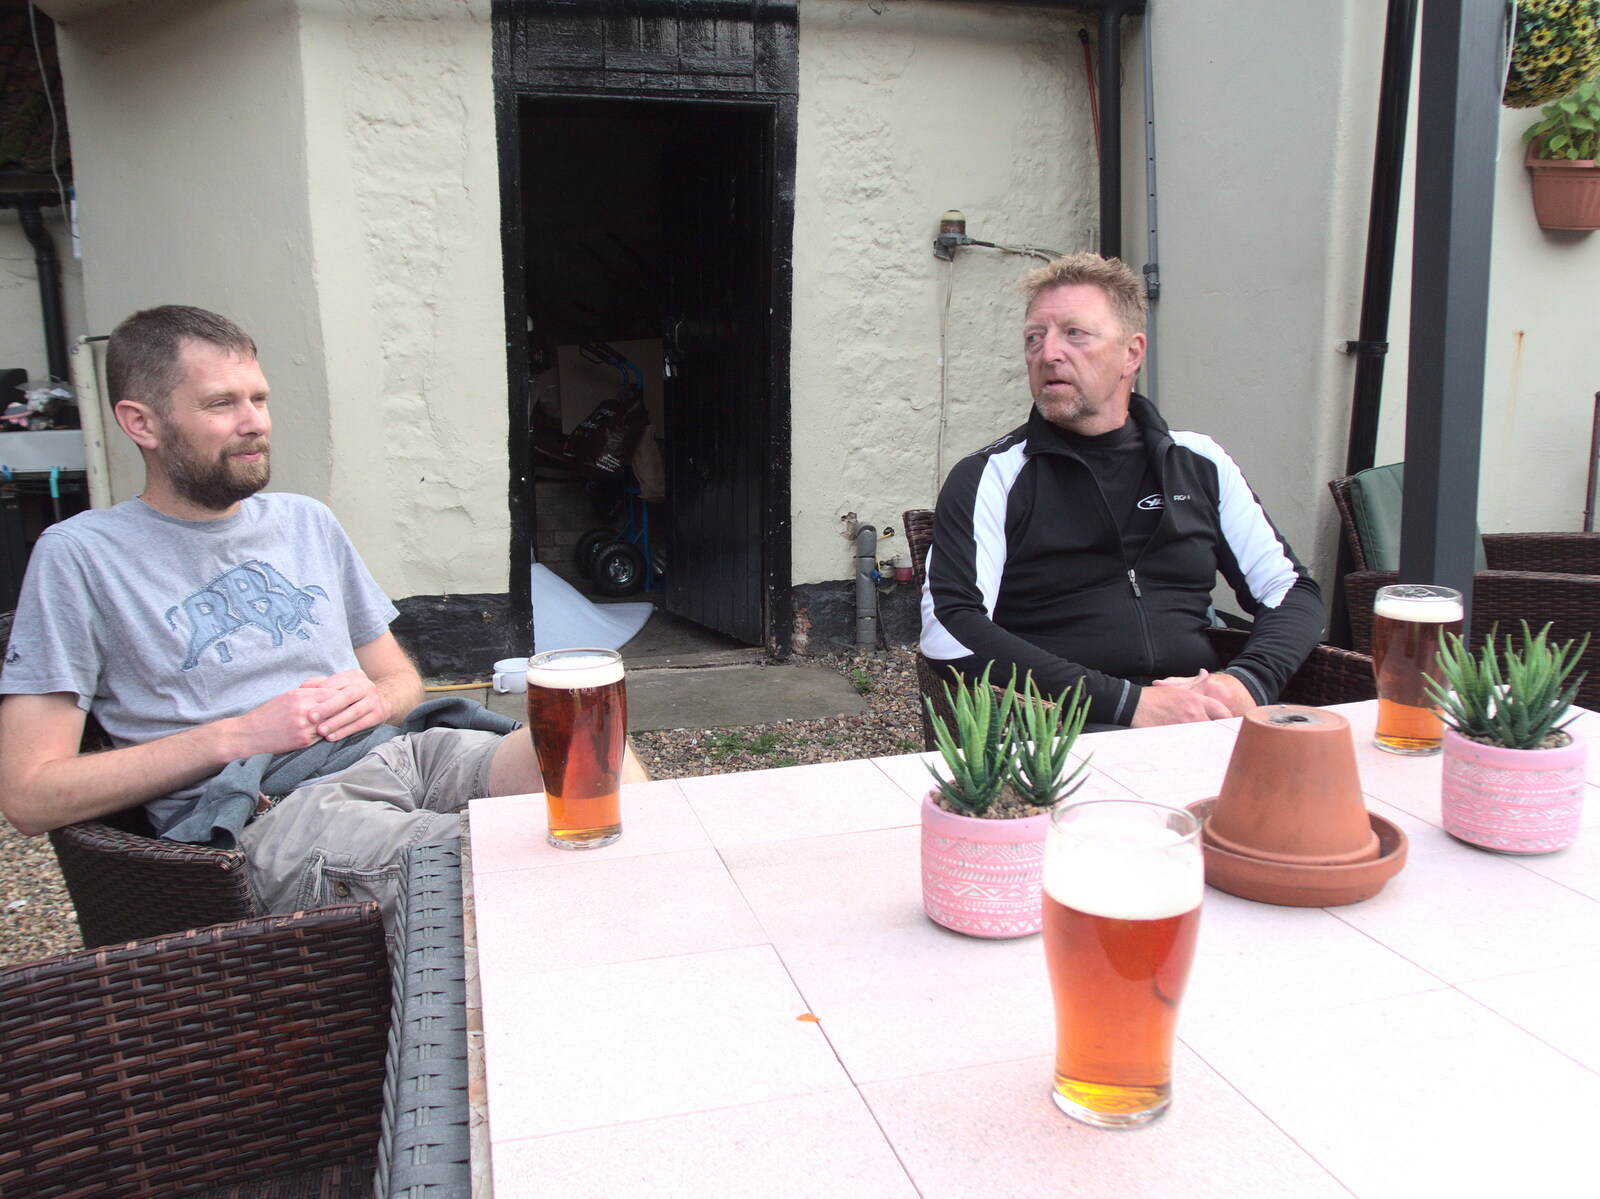 The Boy Phil and Gaz discuss issues of the day from The BSCC at The Crown, Dickleburgh, Norfolk - 19th August 2021